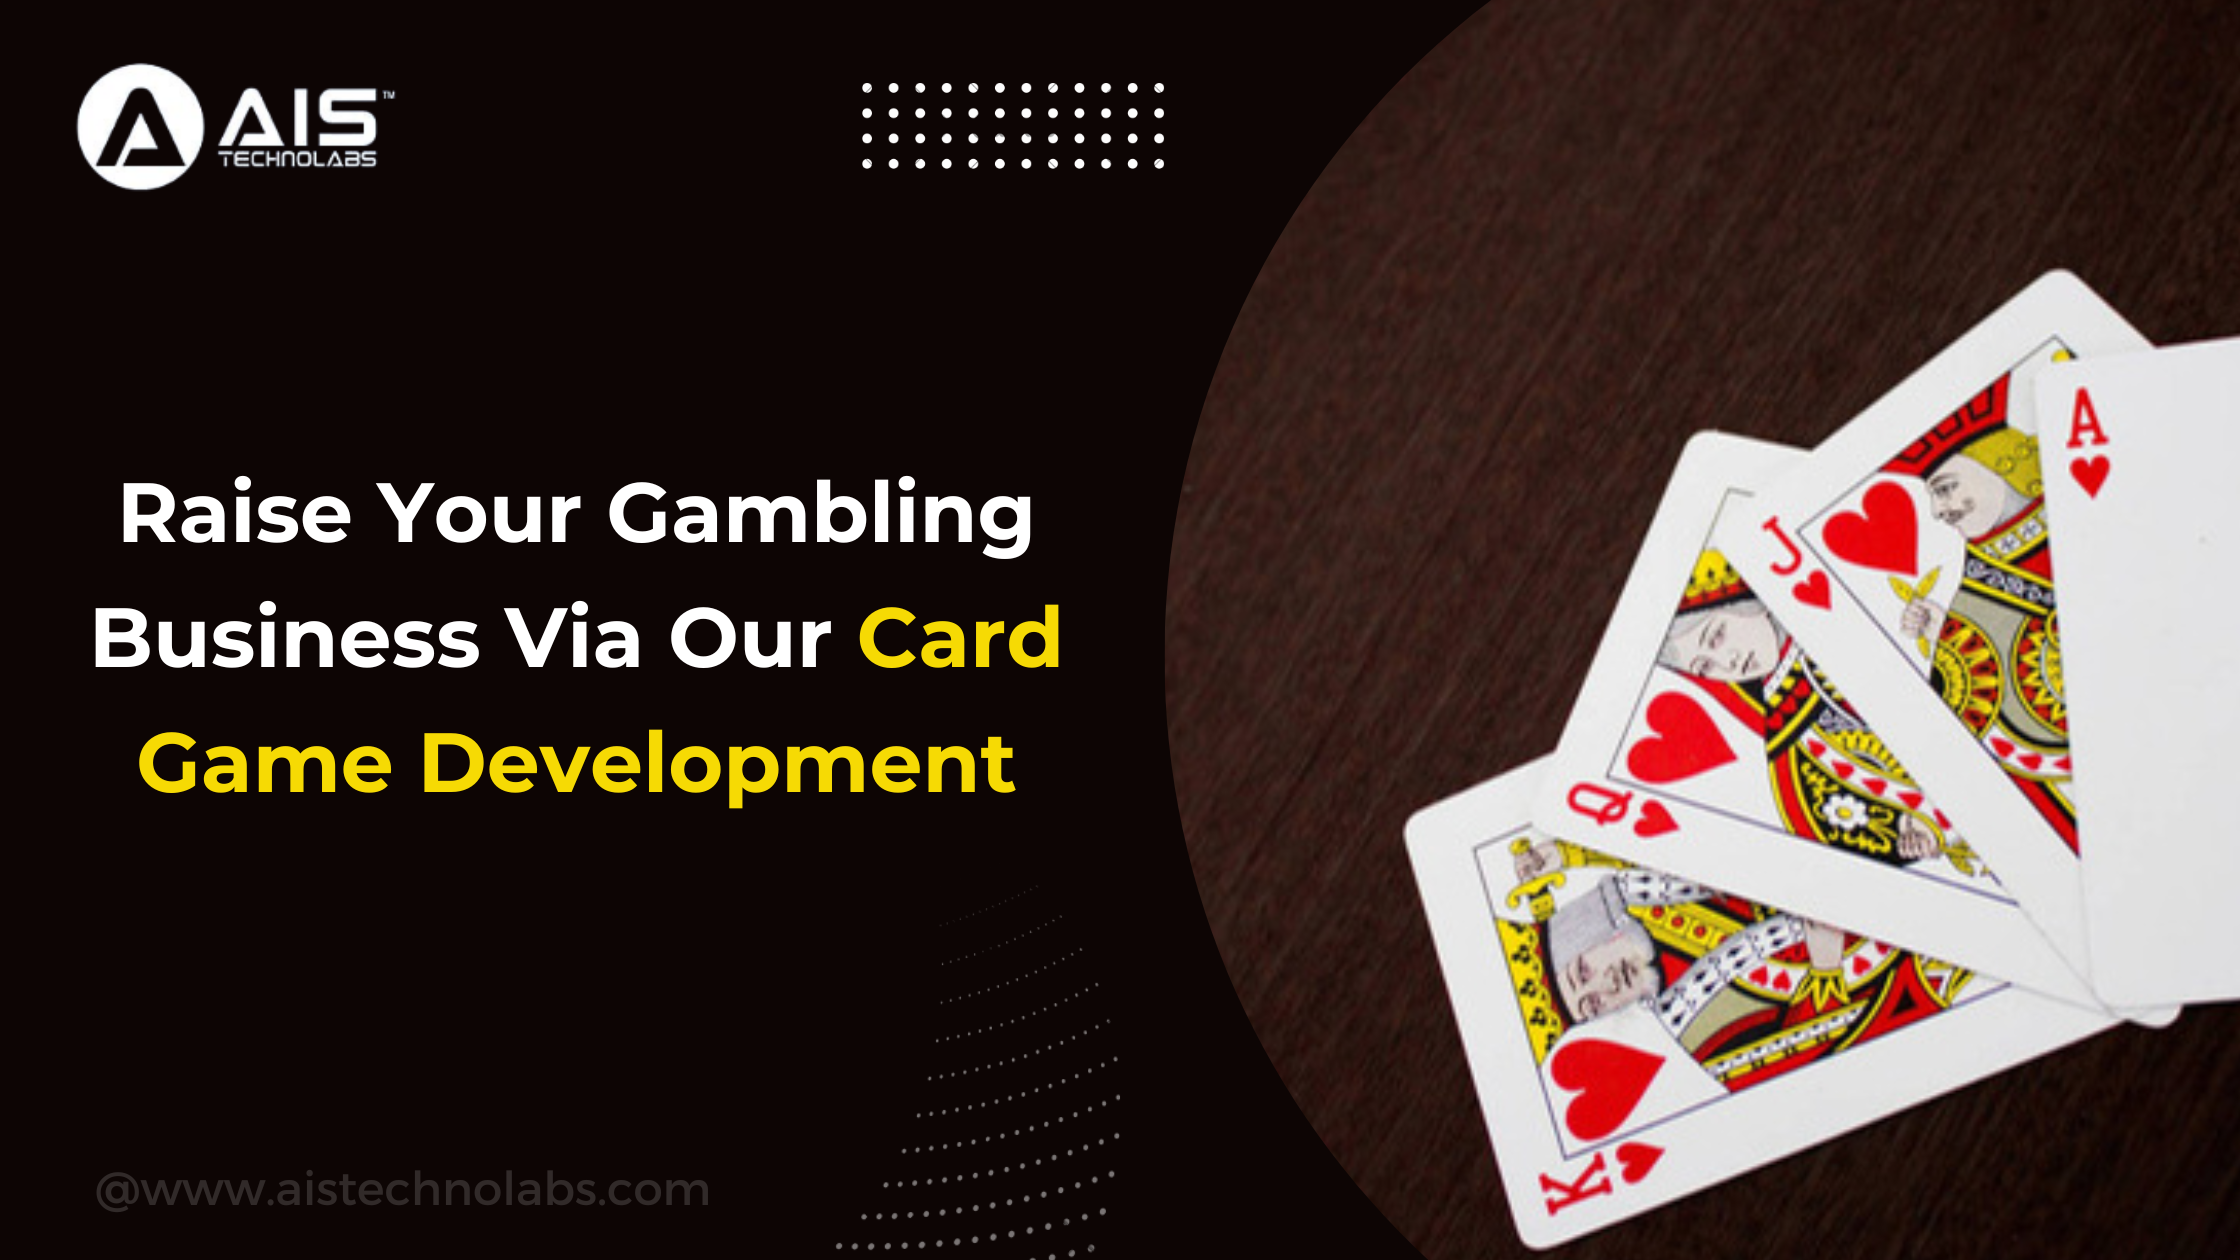 Raise Your Gambling Business Via Our Card Game Development